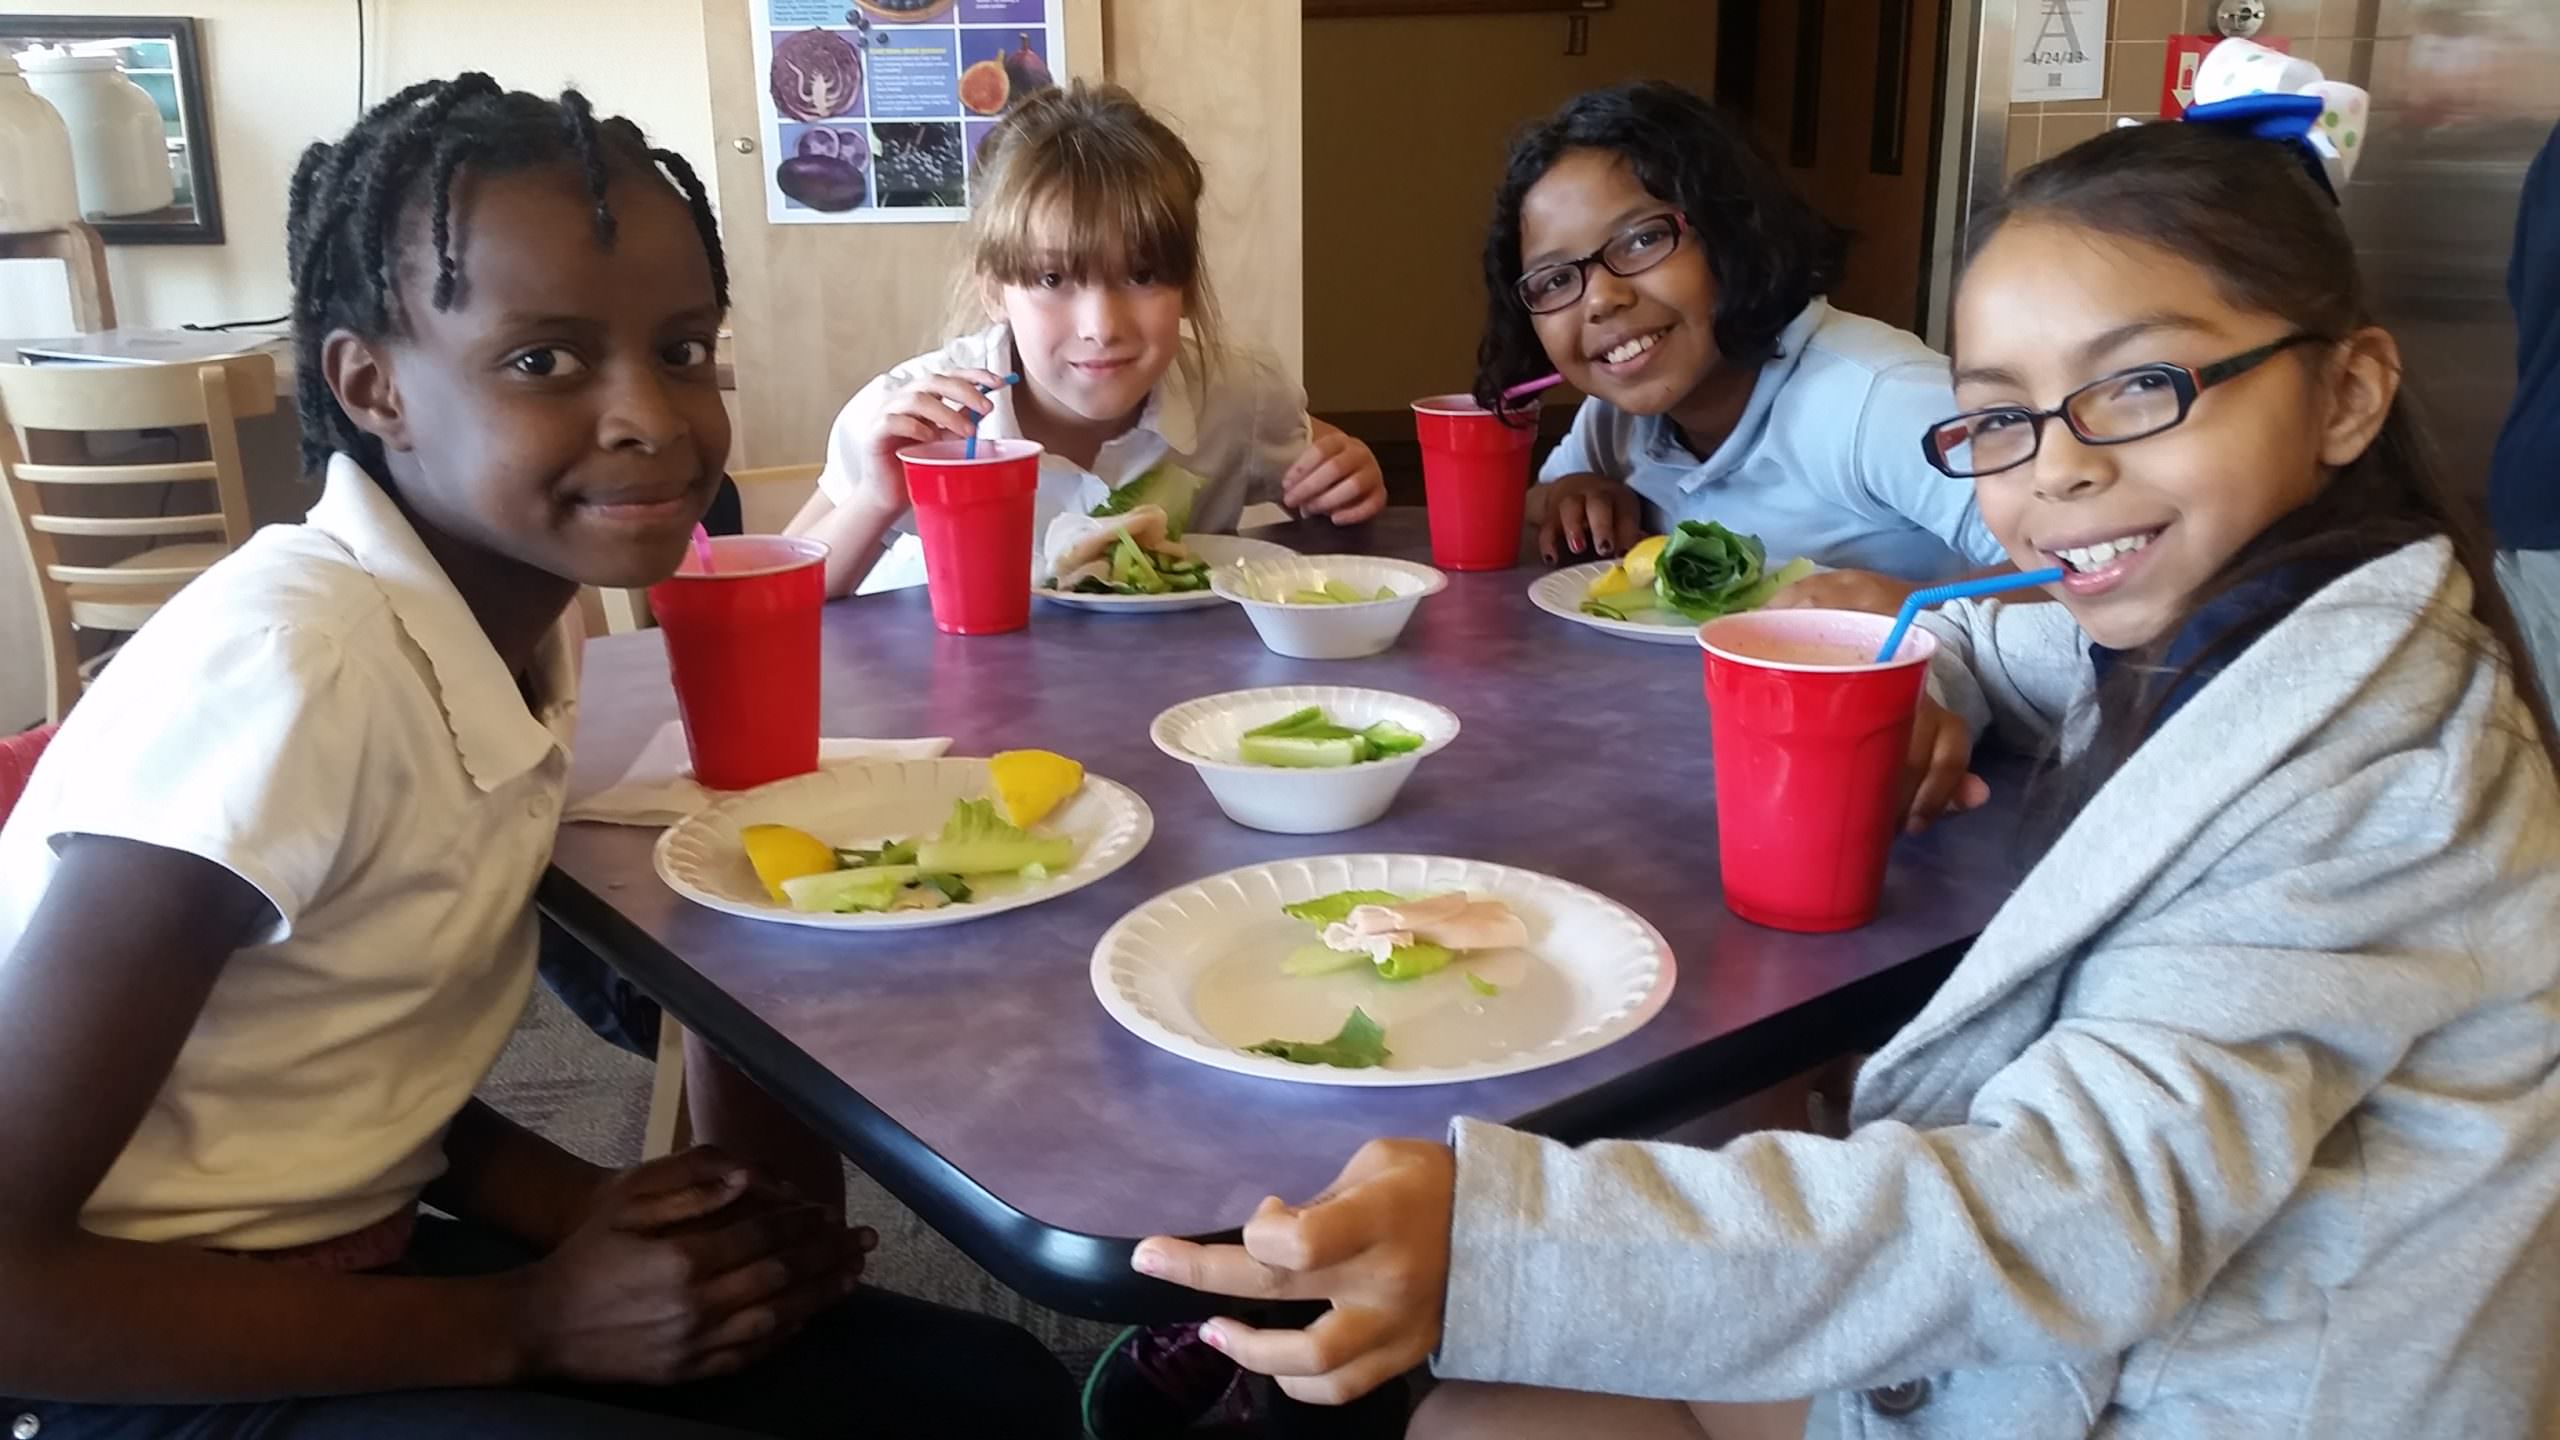 Group of children eating together with healthy choices.